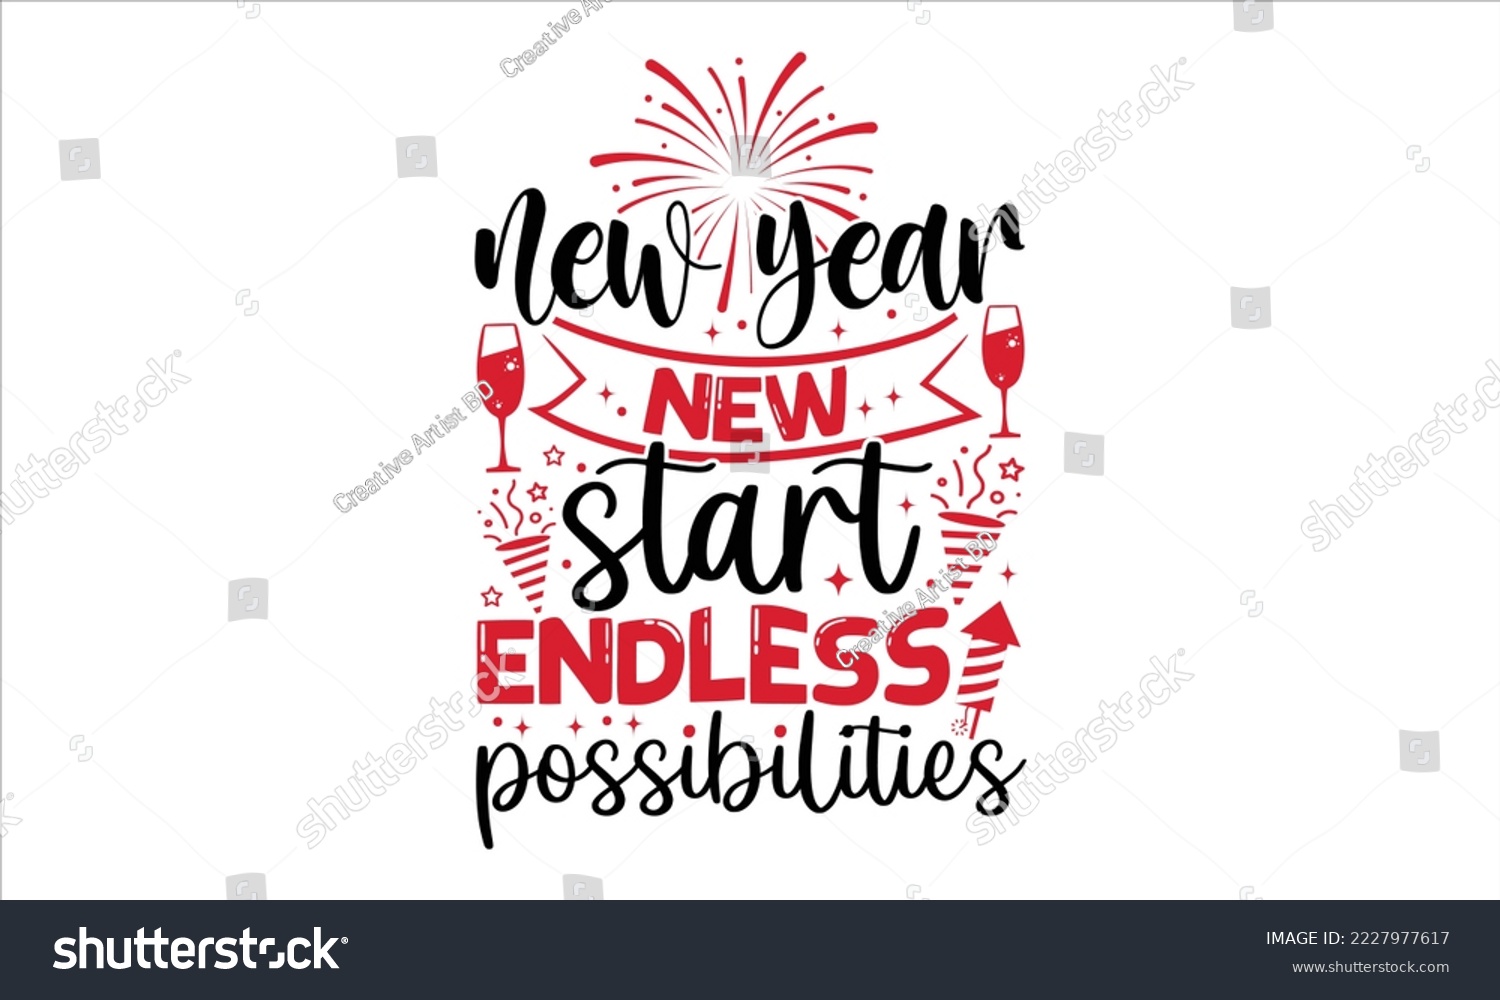 SVG of New Year New Start Endless Possibilities  - Happy New Year  T shirt Design, Hand drawn vintage illustration with hand-lettering and decoration elements, Cut Files for Cricut Svg, Digital Download svg